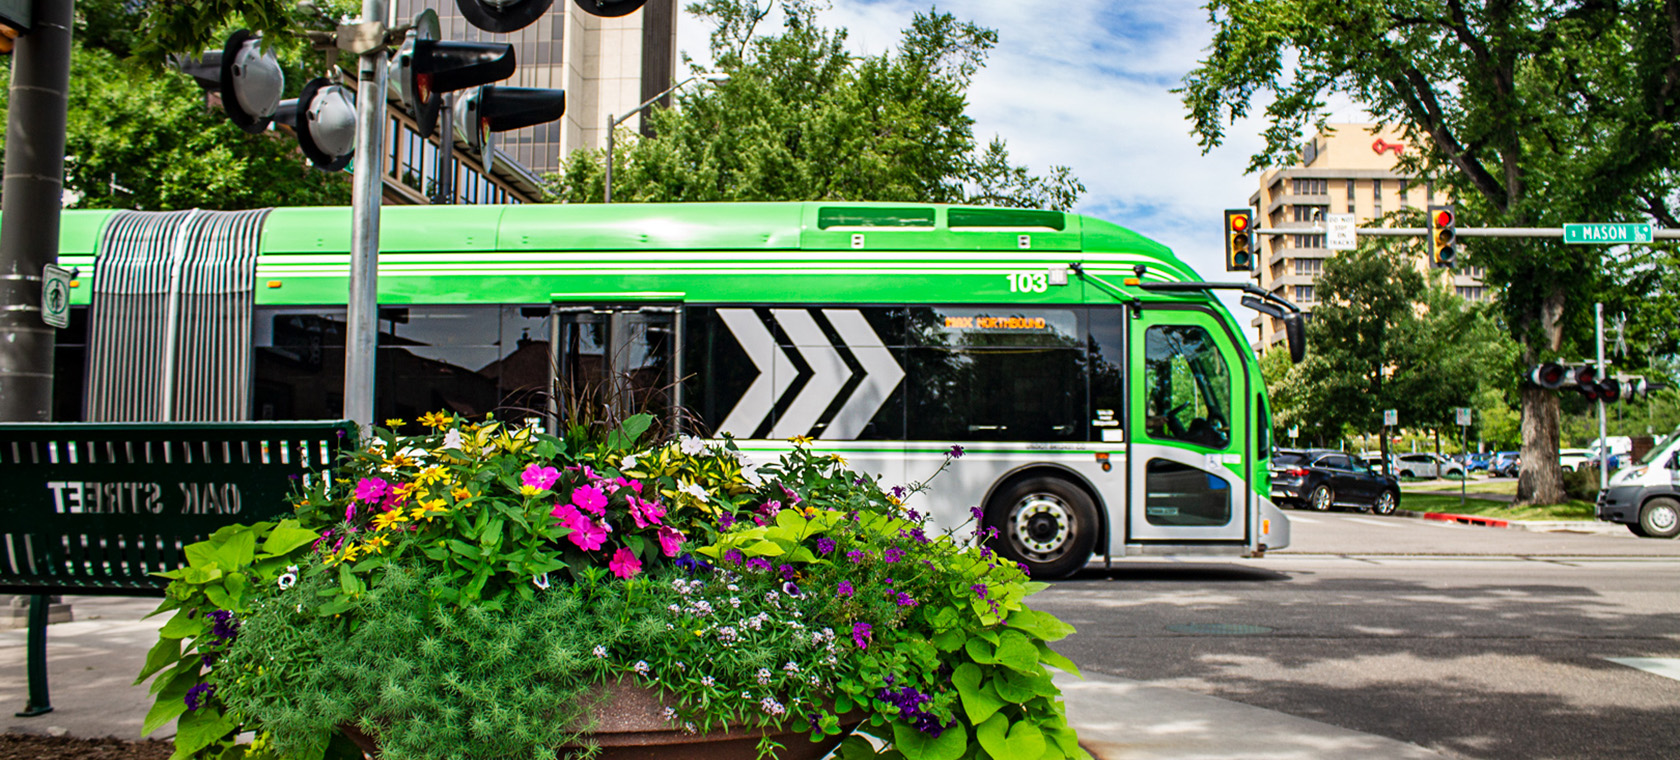 Green bus driving on busy street with building, trees, and flowers in the background.